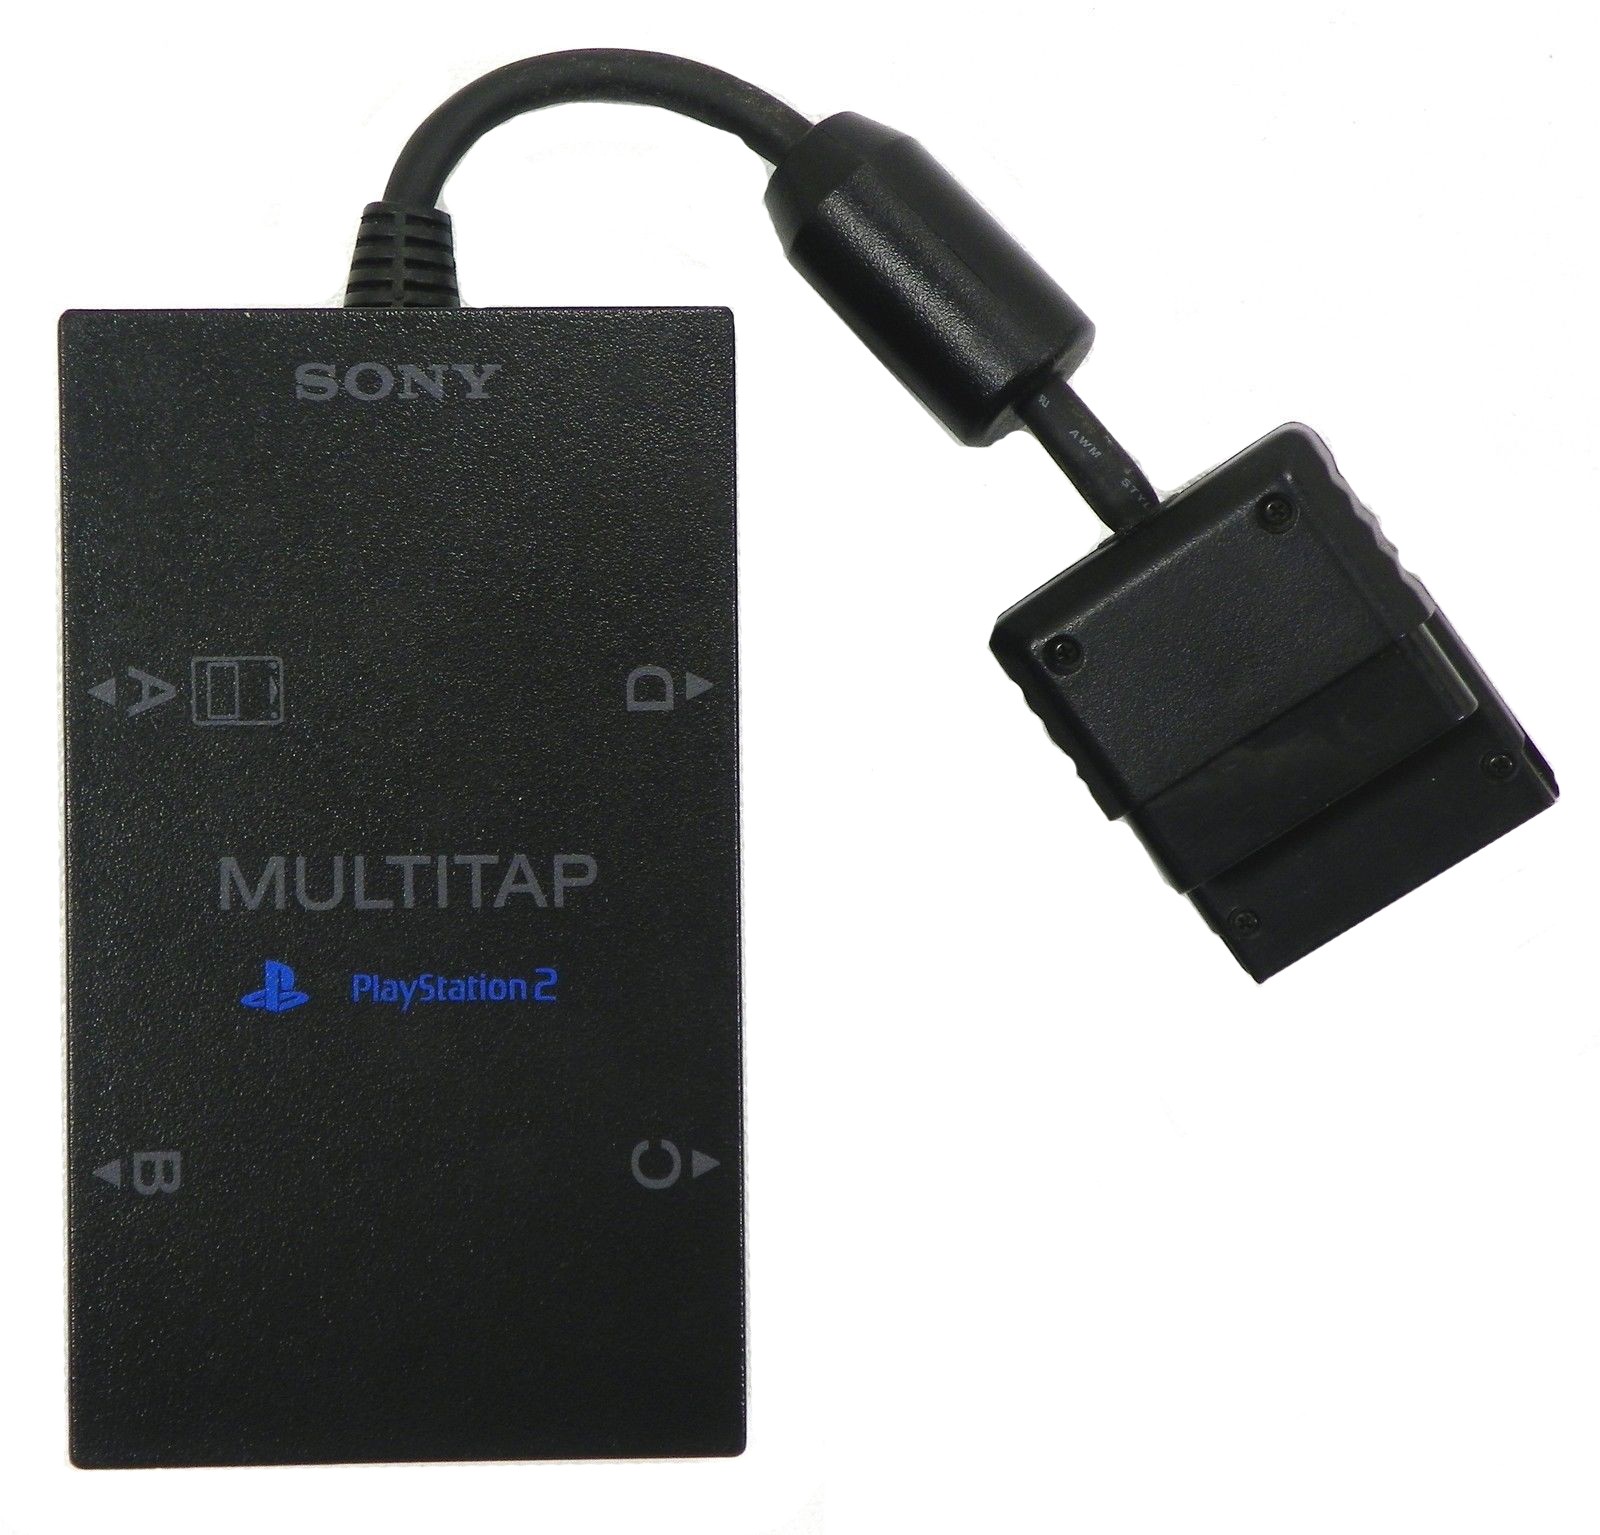 50003176895951-Genuine Playstation 2 SCPH-10090 Controller Multitap-image